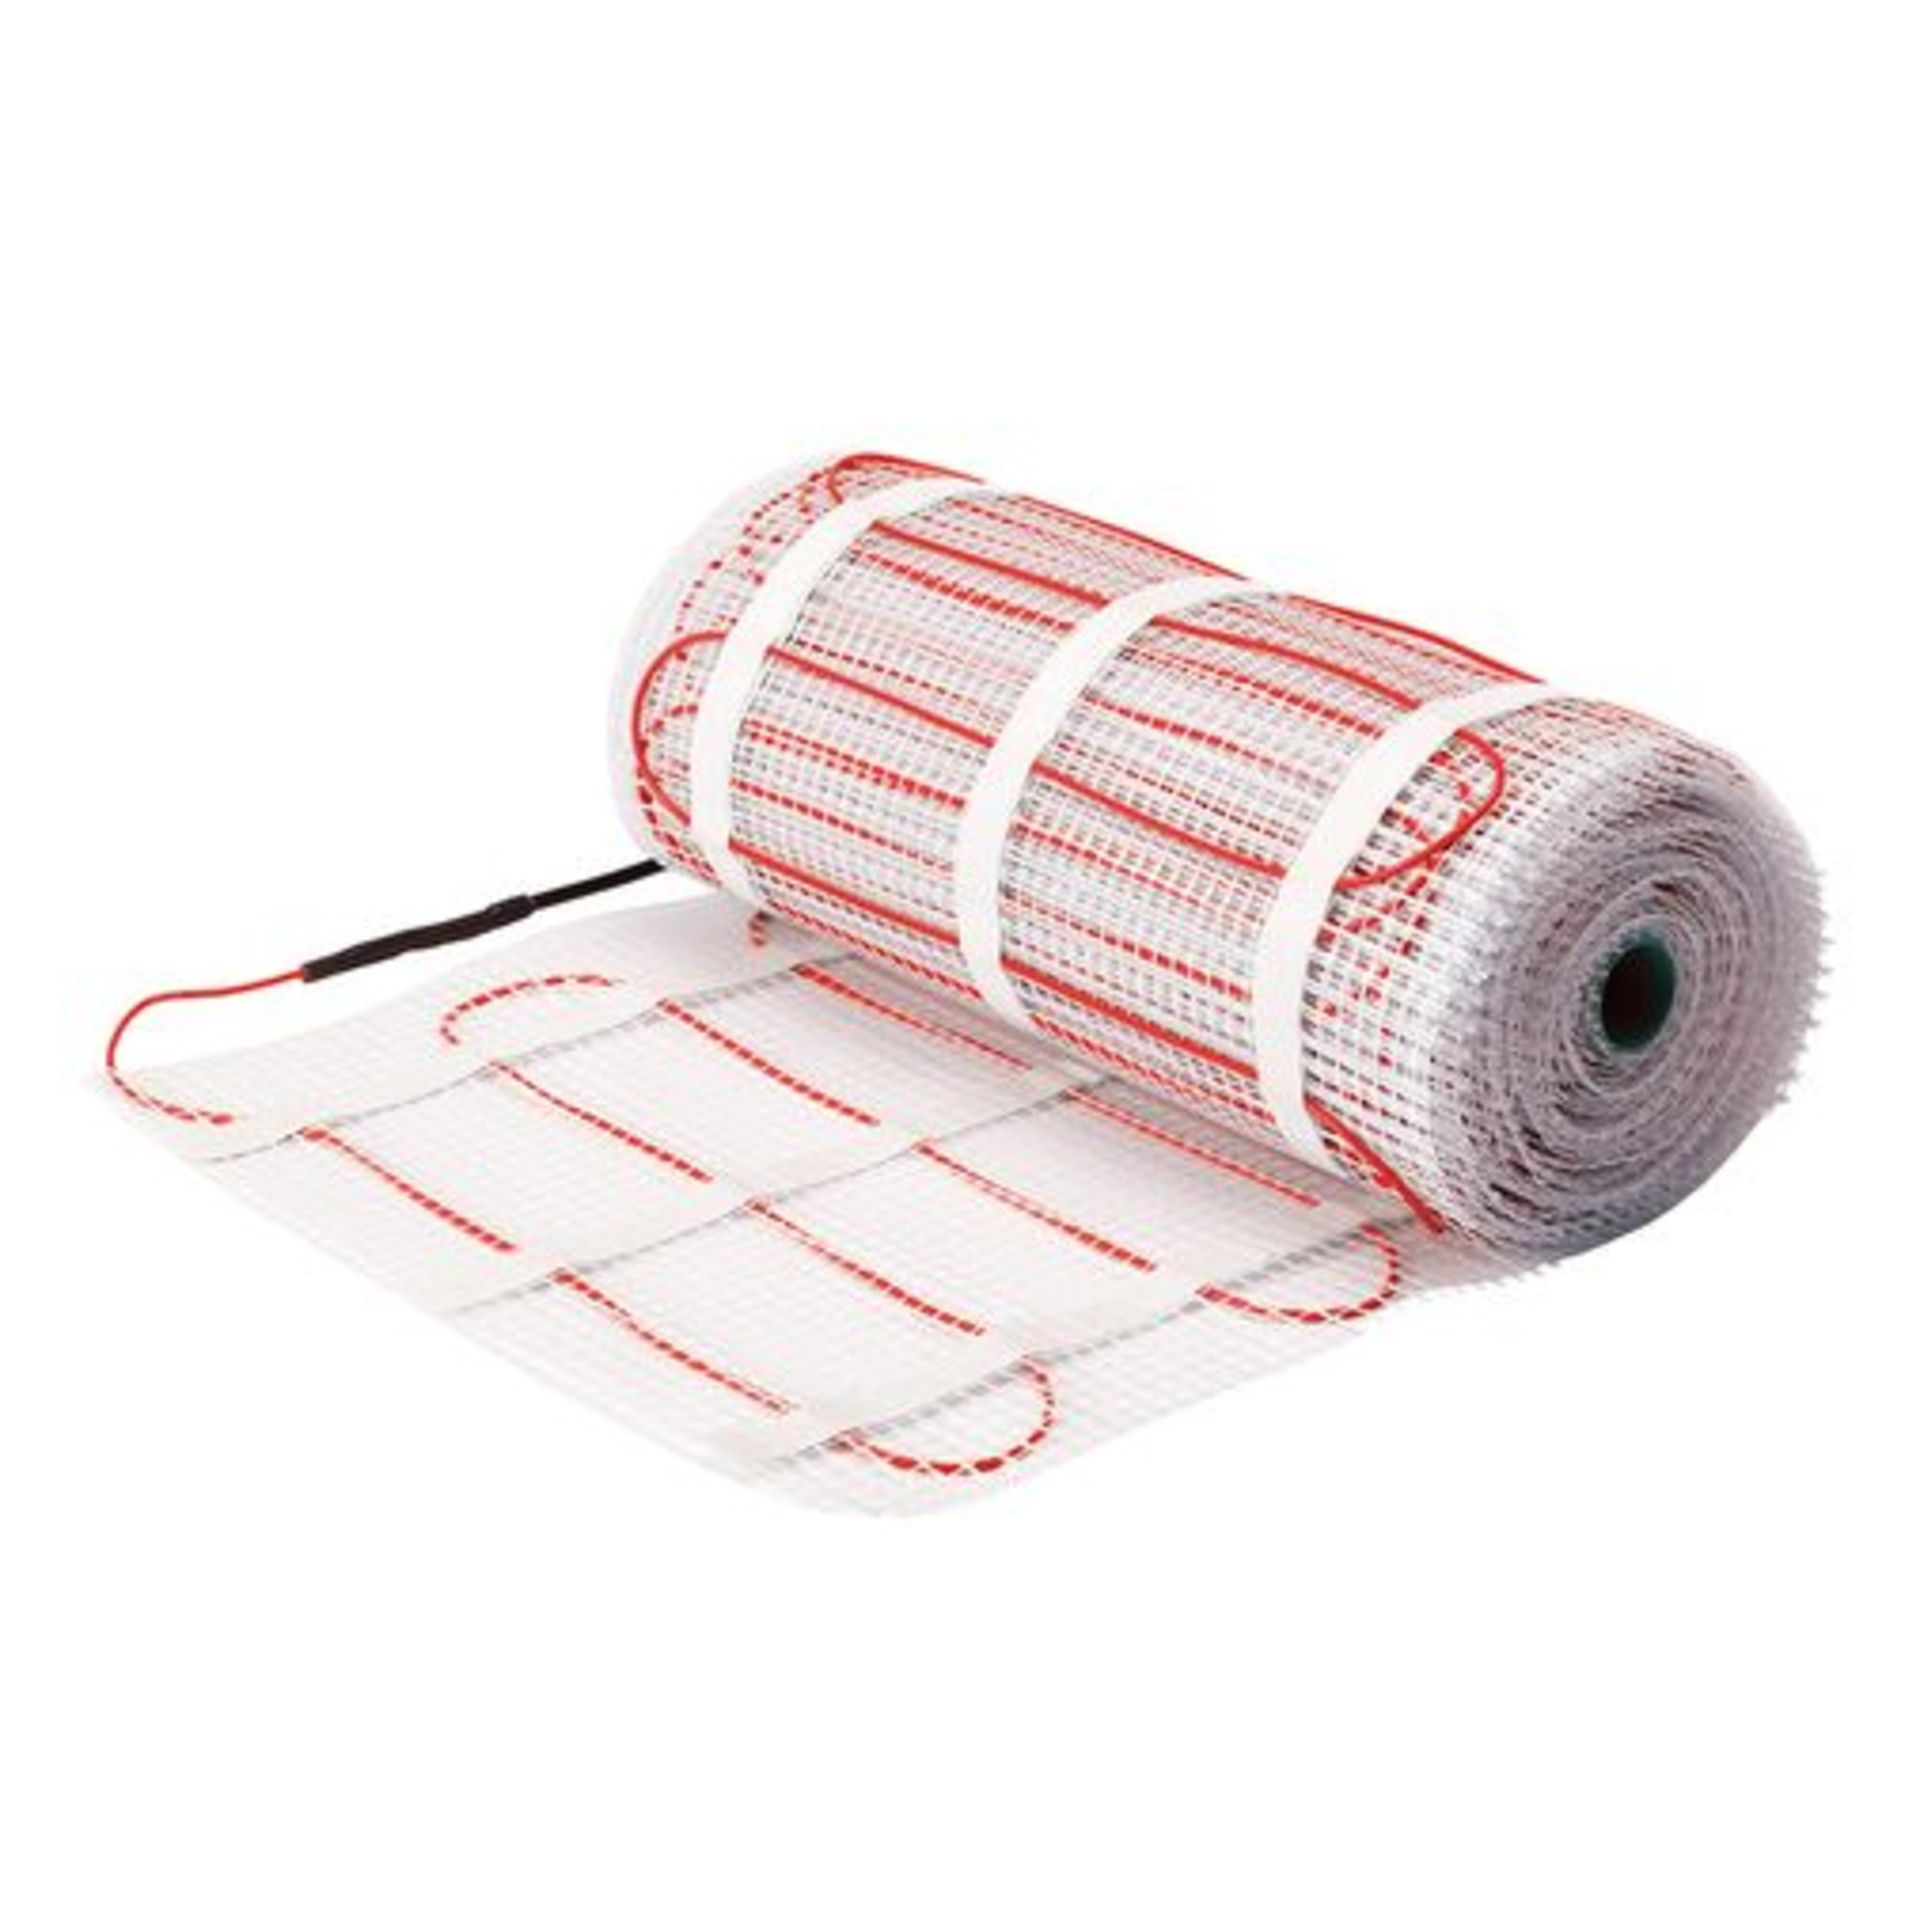 5 SQUARE METERS OF ‘WARMUP’ STICKYMAT SYSTEM UNDERFLOOR HEATING 750W. CODE 44400023500 RRP £250